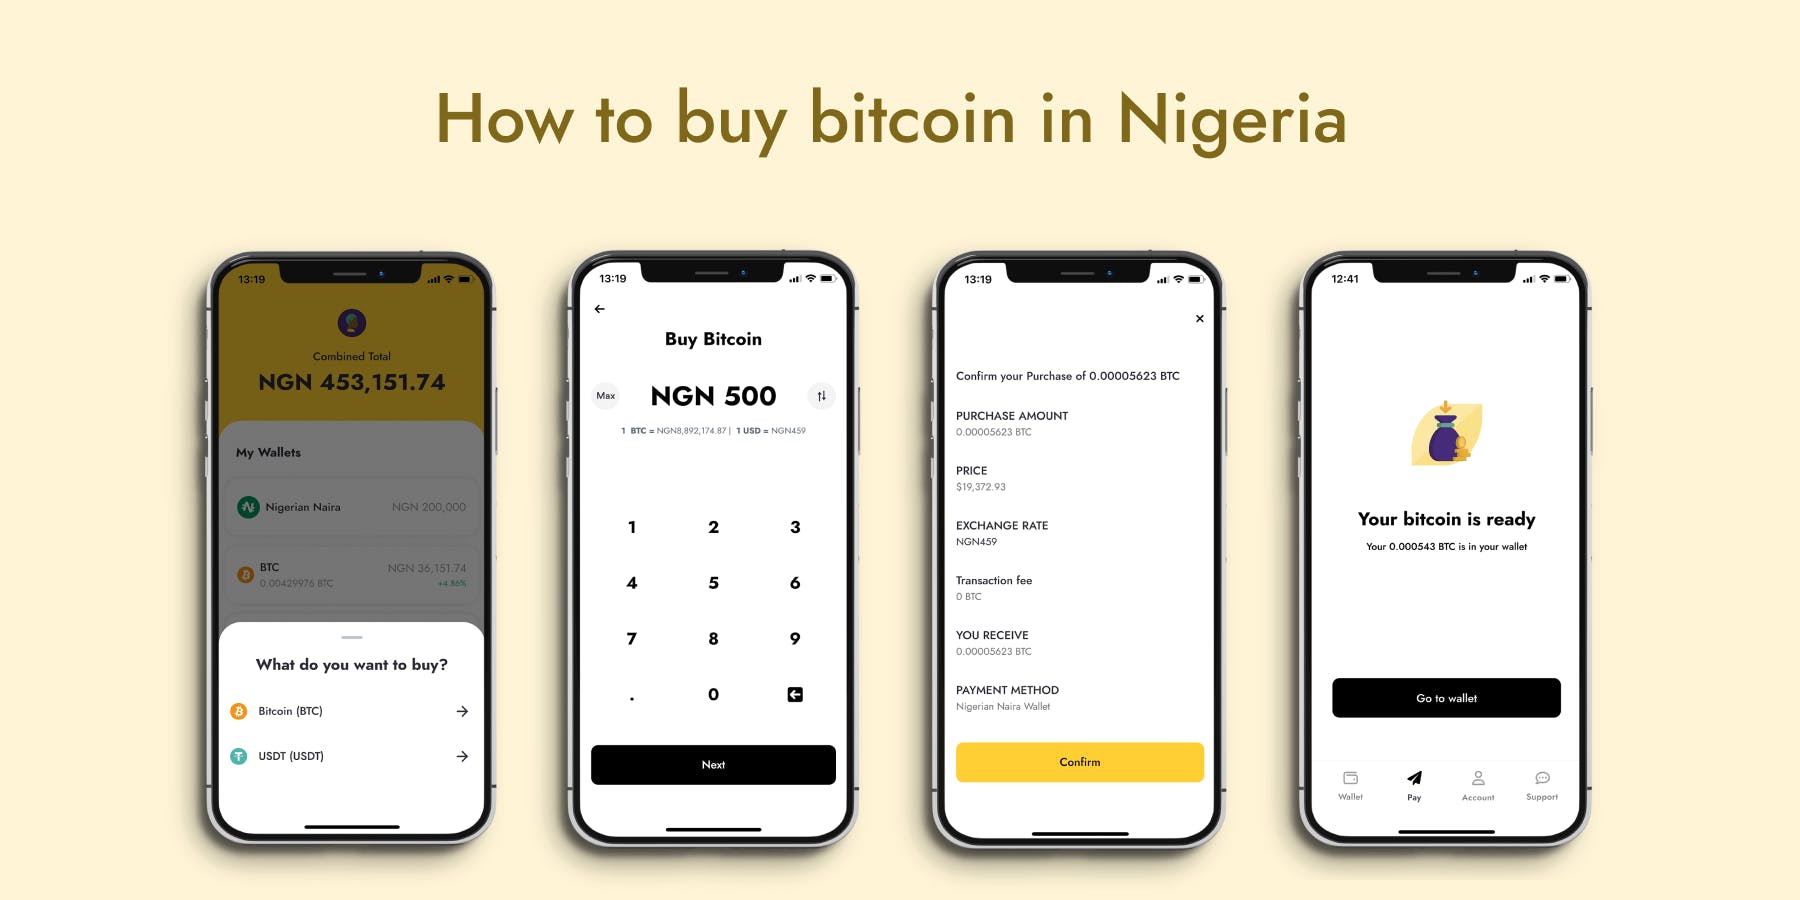 Steps on How To Buy Bitcoin in Nigeria